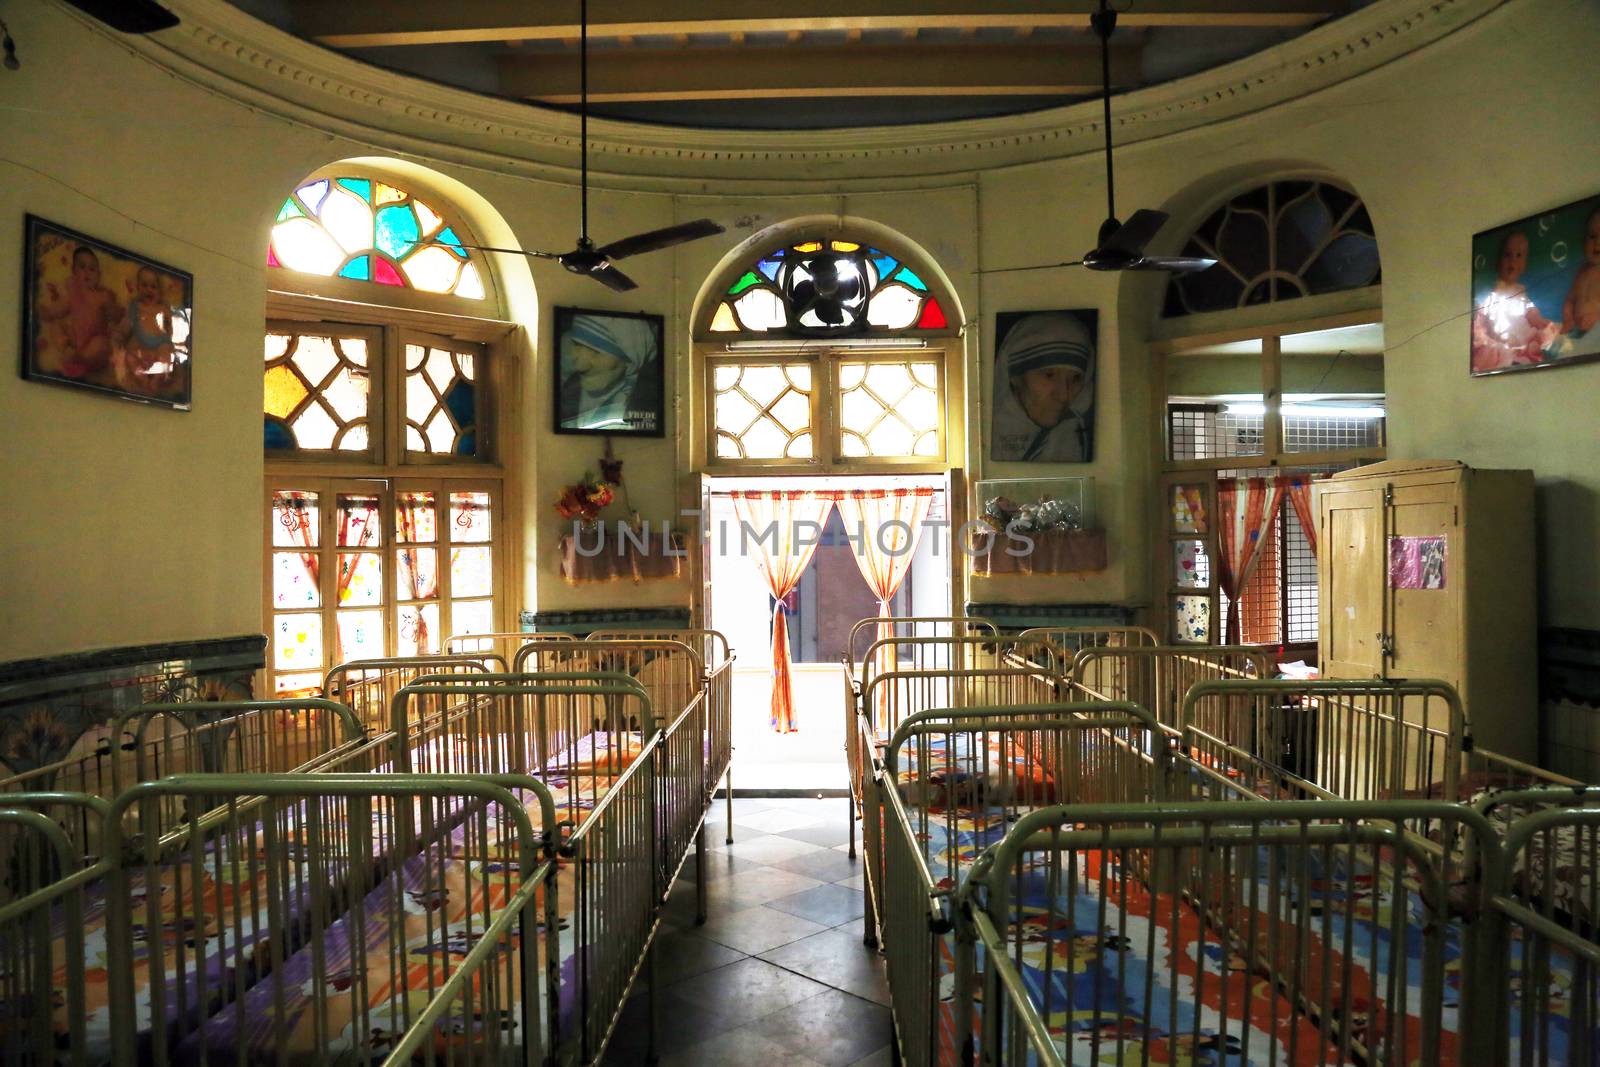 Shishu Bhavan, one of the houses established by Mother Teresa and run by the Missionaries of Charity in Kolkata by atlas